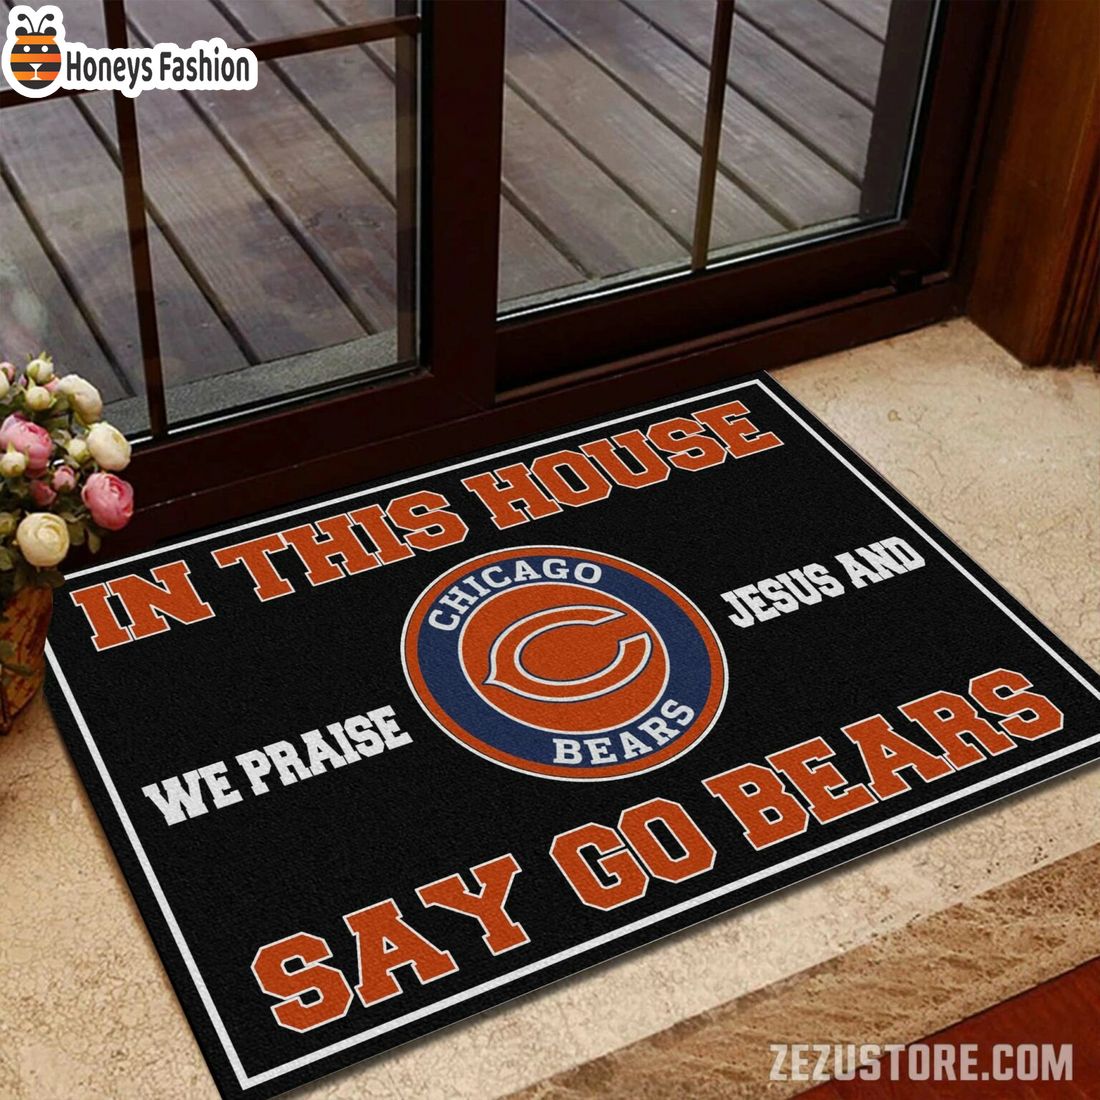 In this house we praise jesus and say go Bears doormat